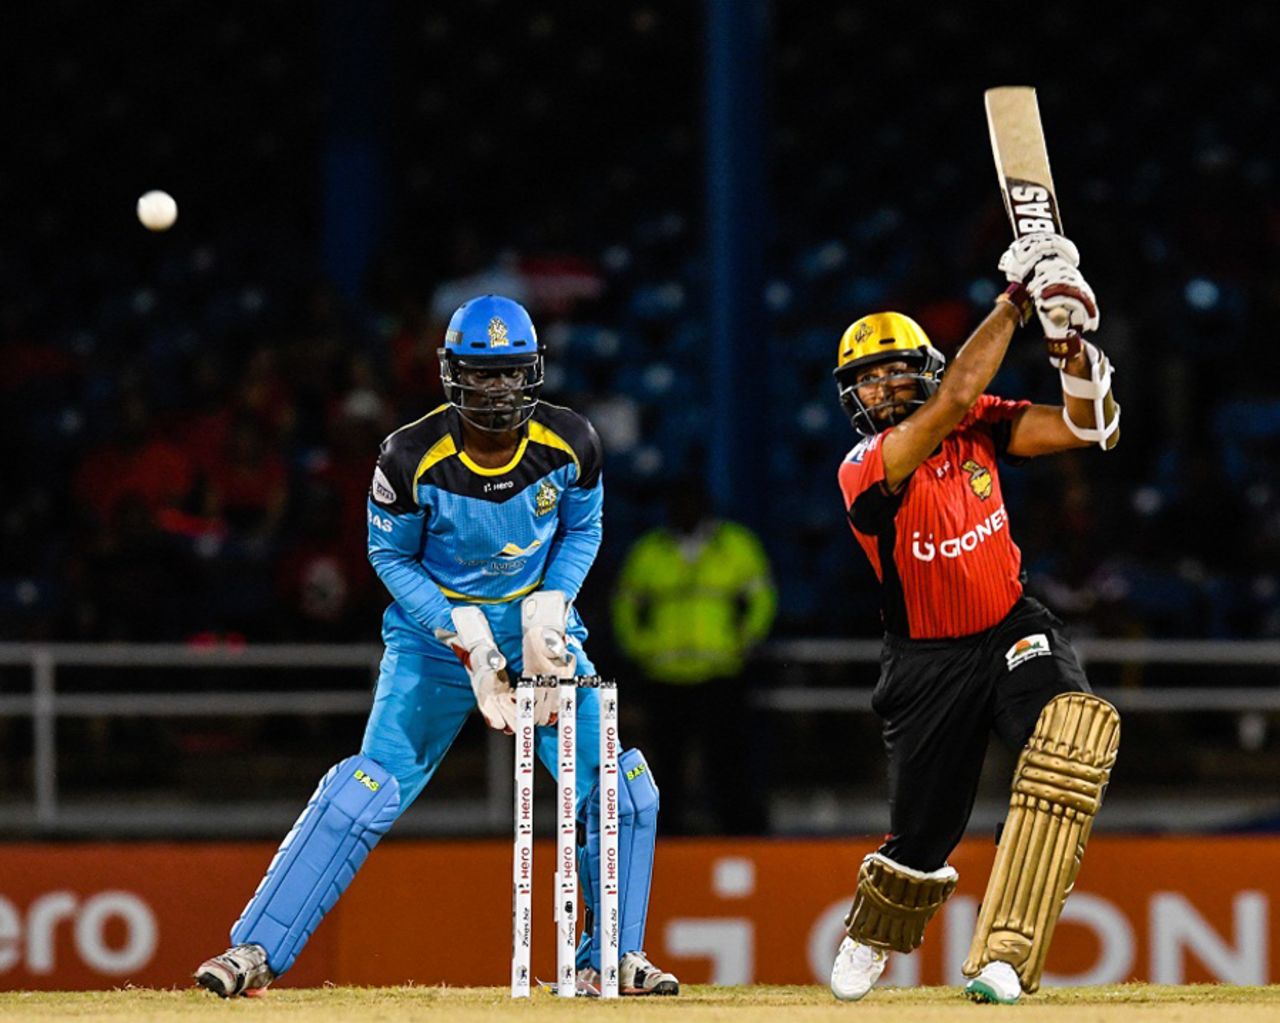 Hashim Amla drives through the off side,  Trinbago Knight Riders v St Lucia Zouks, CPL 2016, Port of Spain, June 29, 2016